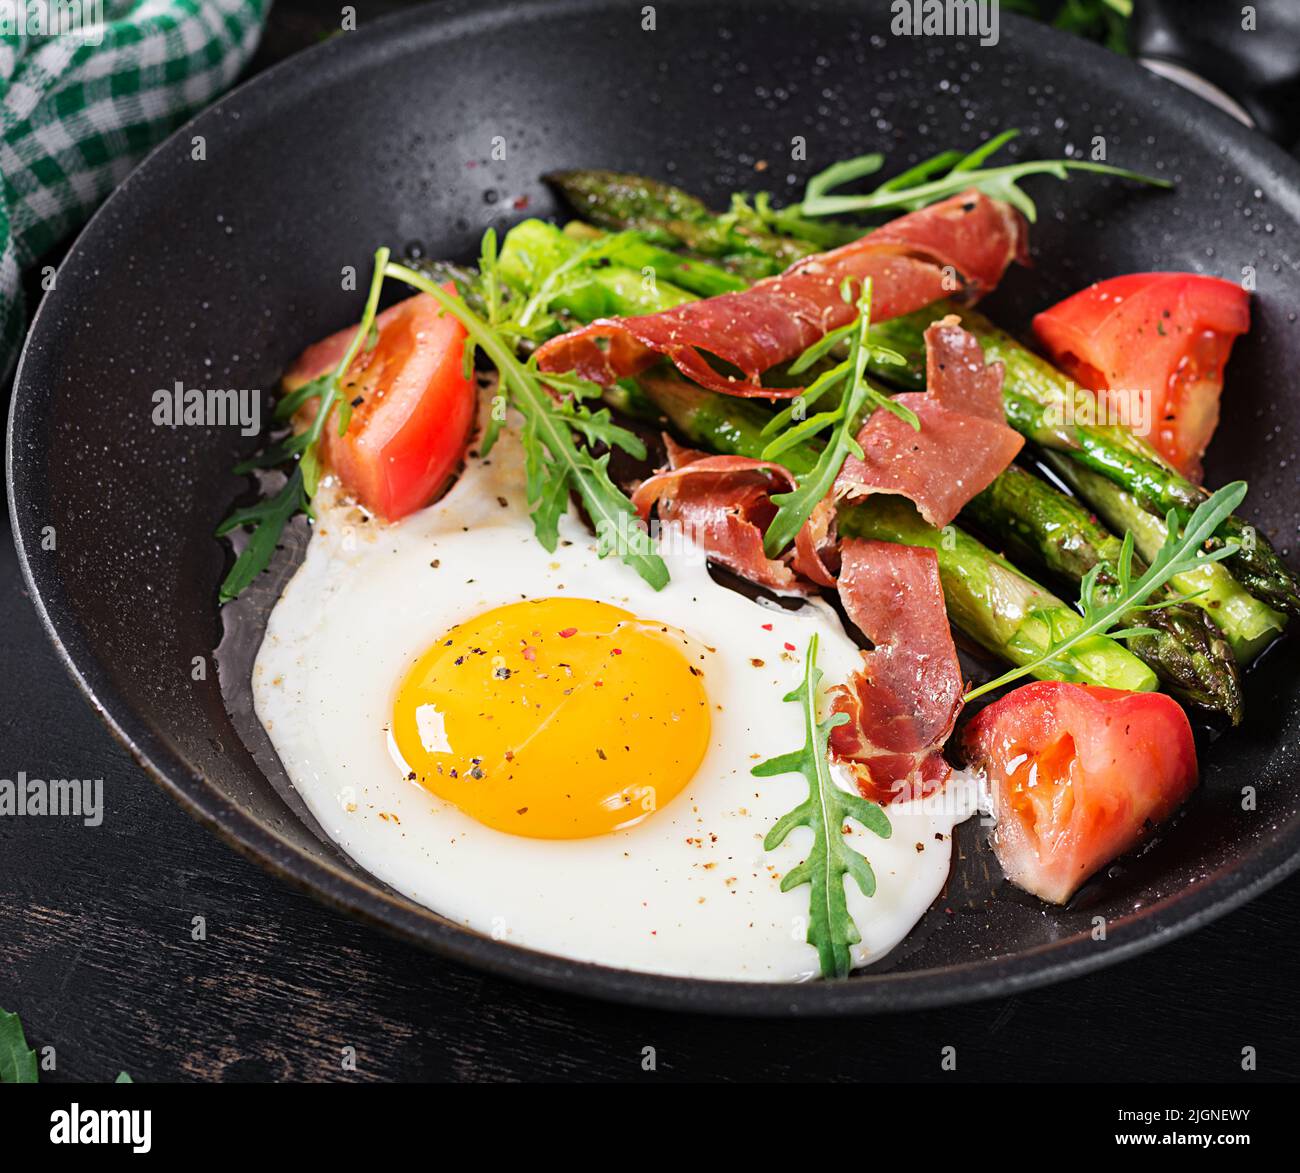 Fried egg with asparagus, tomato and bacon. Useful breakfast. Stock Photo